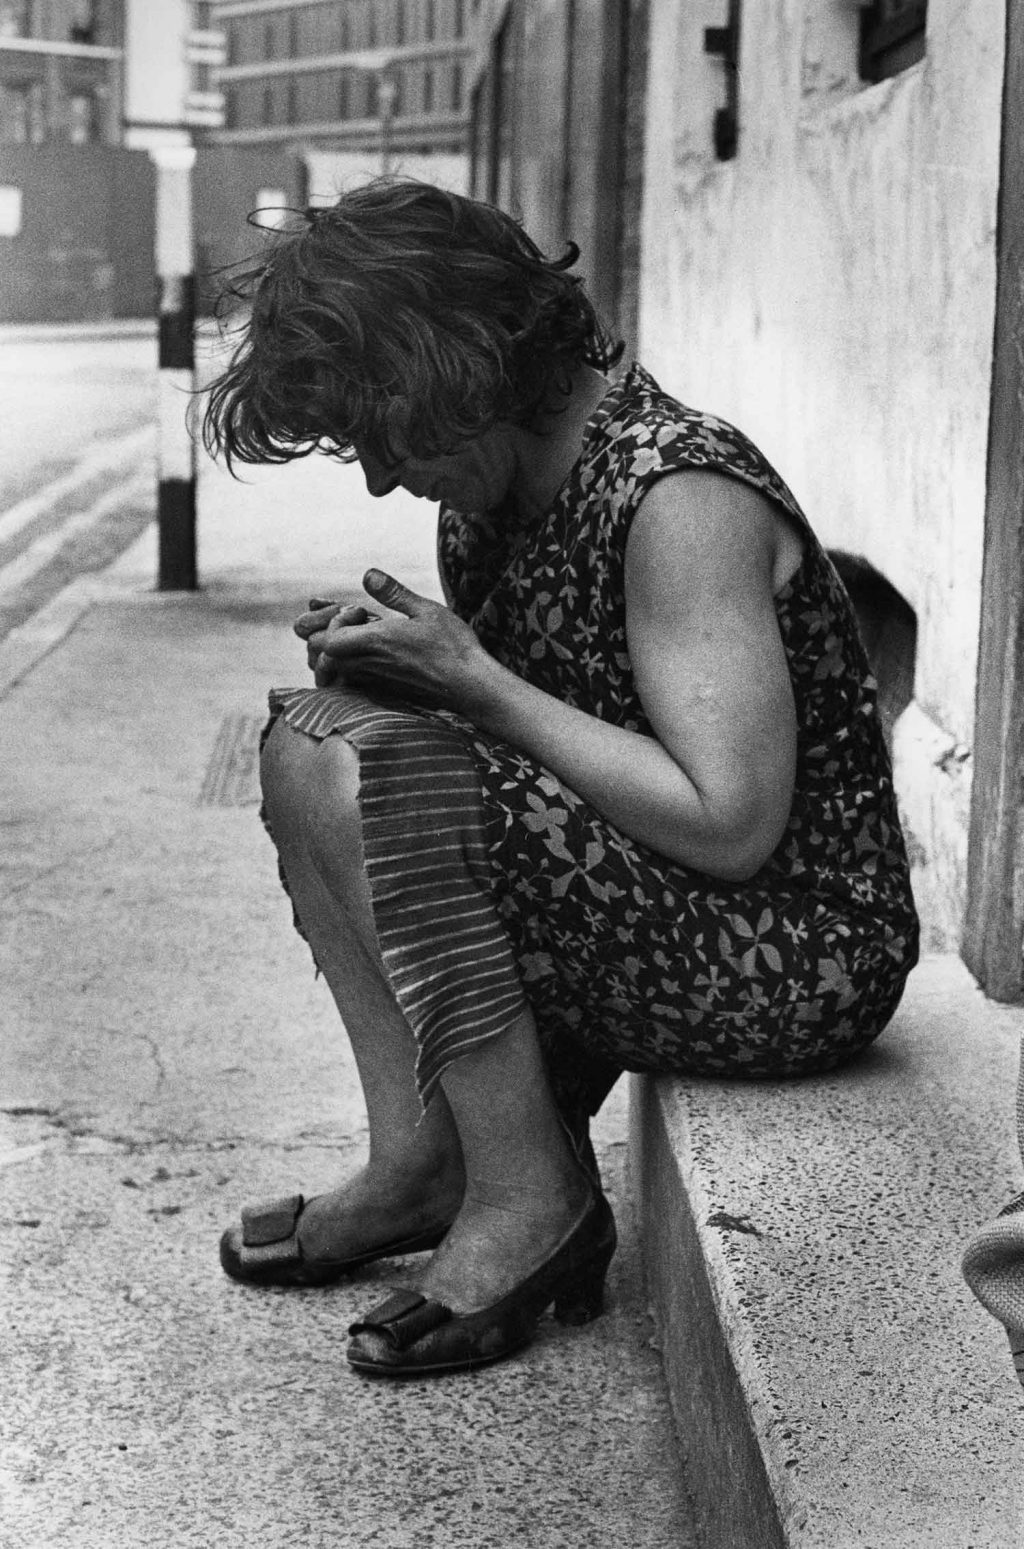 A photograph of a woman called Sylvia in Tenterground, Spitalfields in 1970s: Images of Housing, Homelessness and Resistance in London's East End, from the Conditions of Living exhibition at Four Corners.